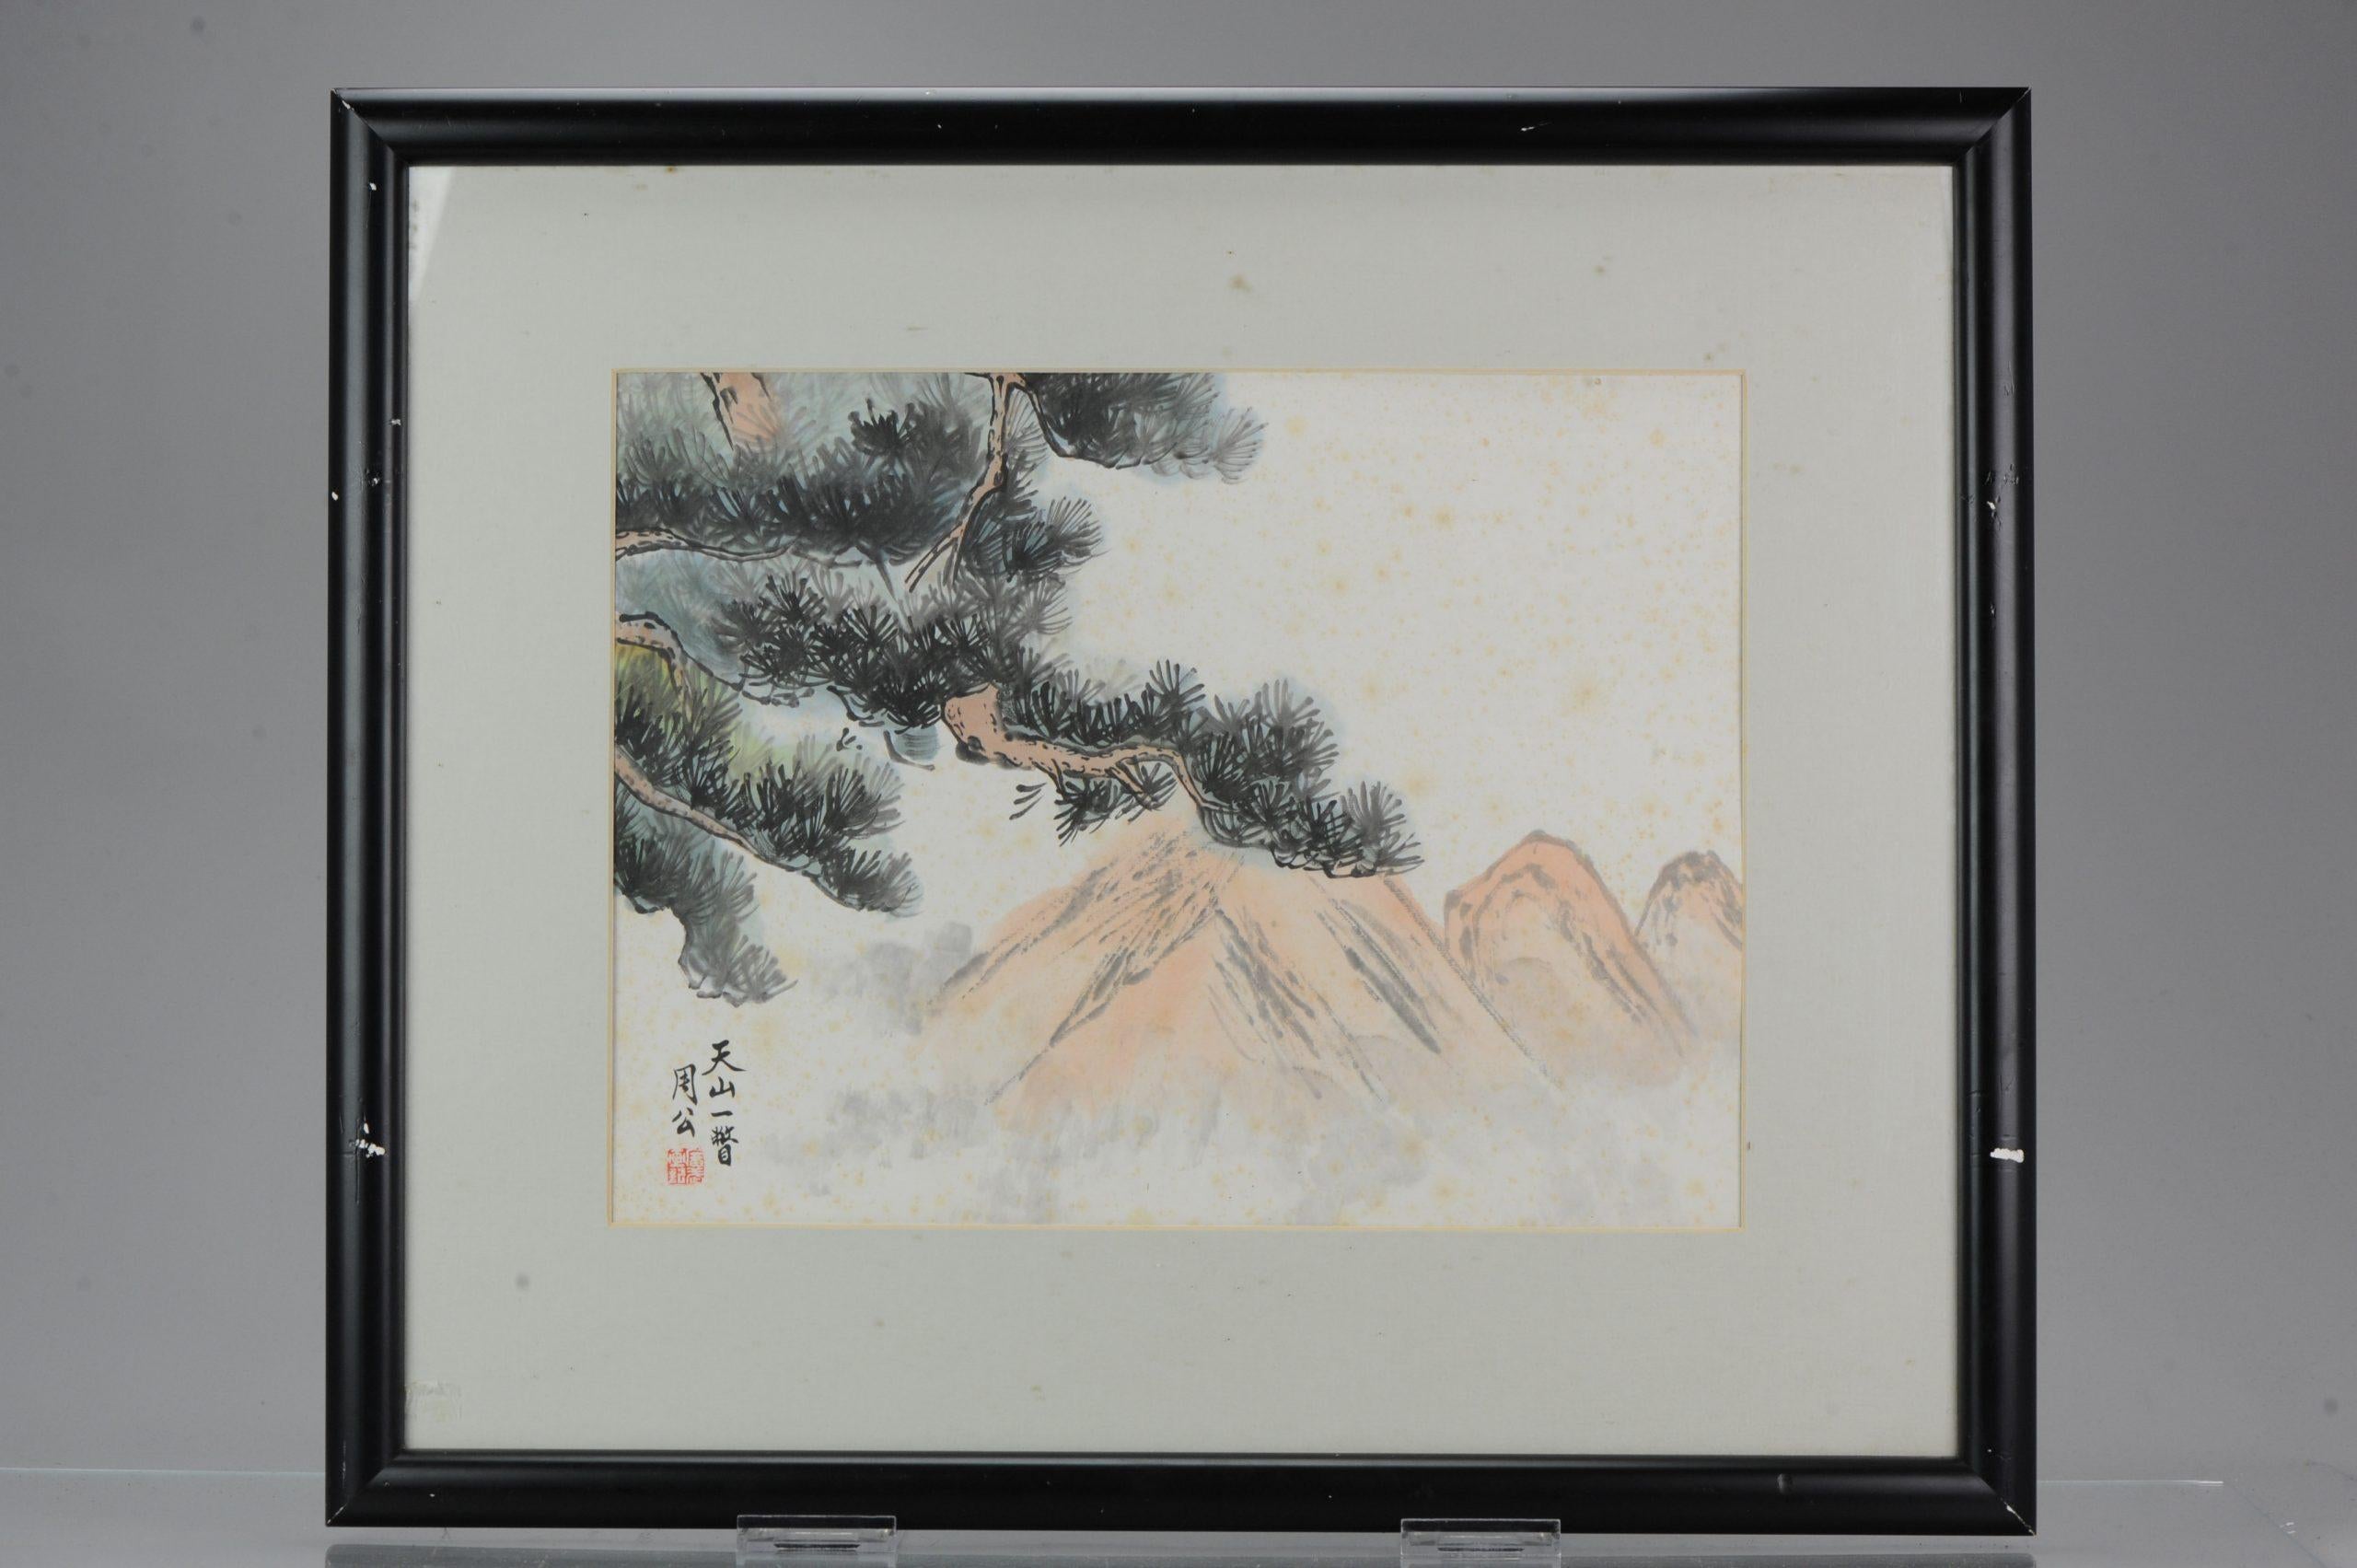 Description
As you can see, it is a work of landscape, A glance at the Mountains of Heaven. Part of a set of 3 paintings. The can be all found in our store

Condition
Overall condition Age signs to painting like moisture spots. The outside also